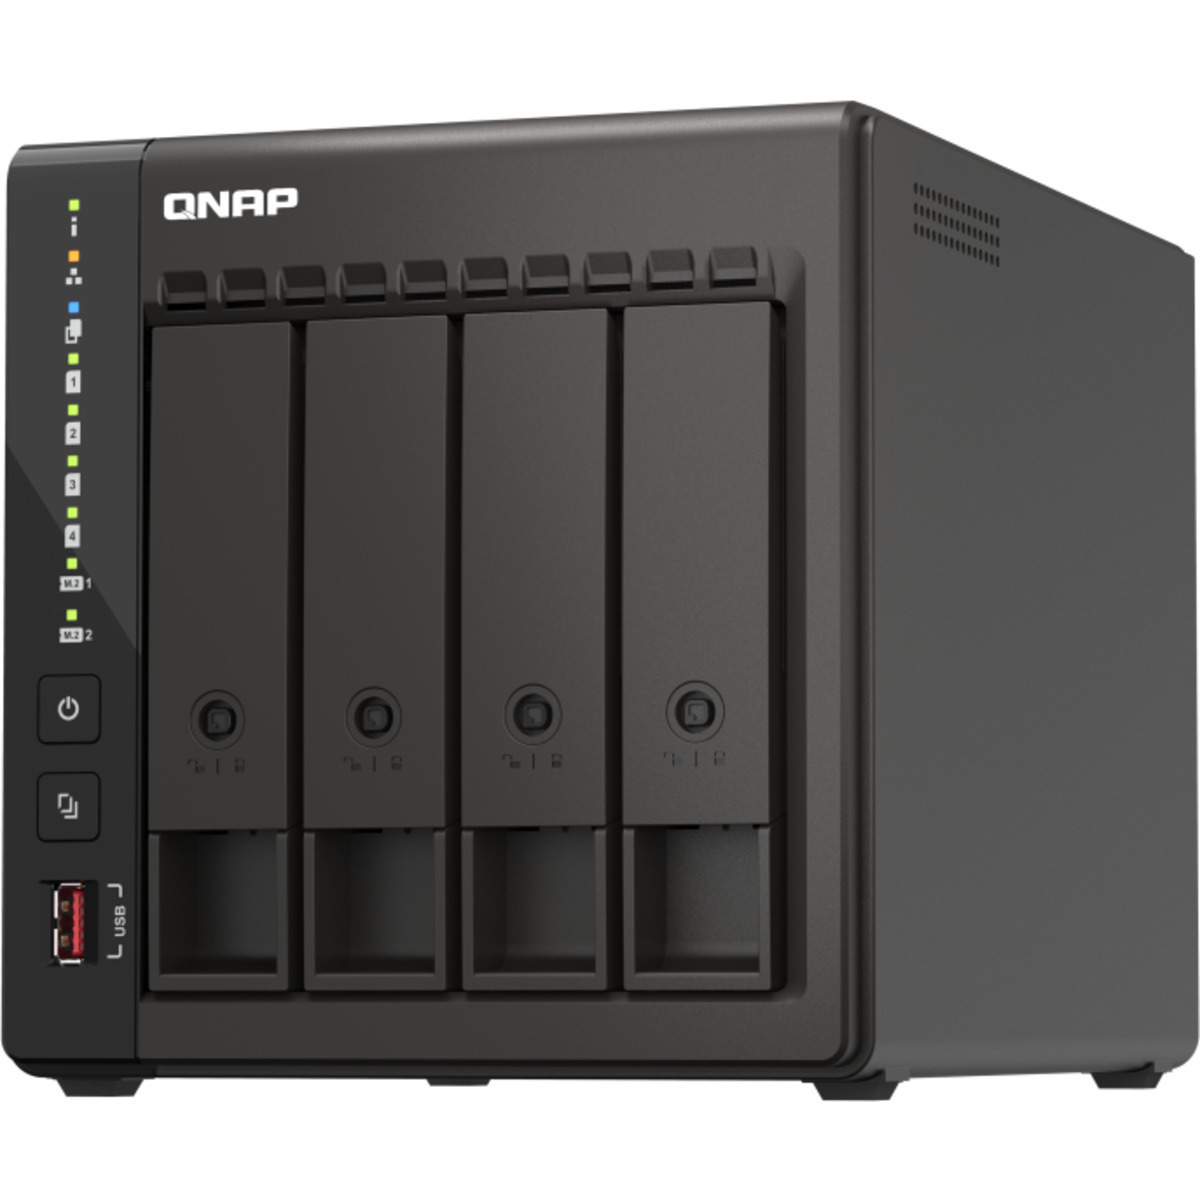 QNAP TS-453E 16tb 4-Bay Desktop Multimedia / Power User / Business NAS - Network Attached Storage Device 4x4tb Seagate IronWolf ST4000VN006 3.5 5400rpm SATA 6Gb/s HDD NAS Class Drives Installed - Burn-In Tested TS-453E